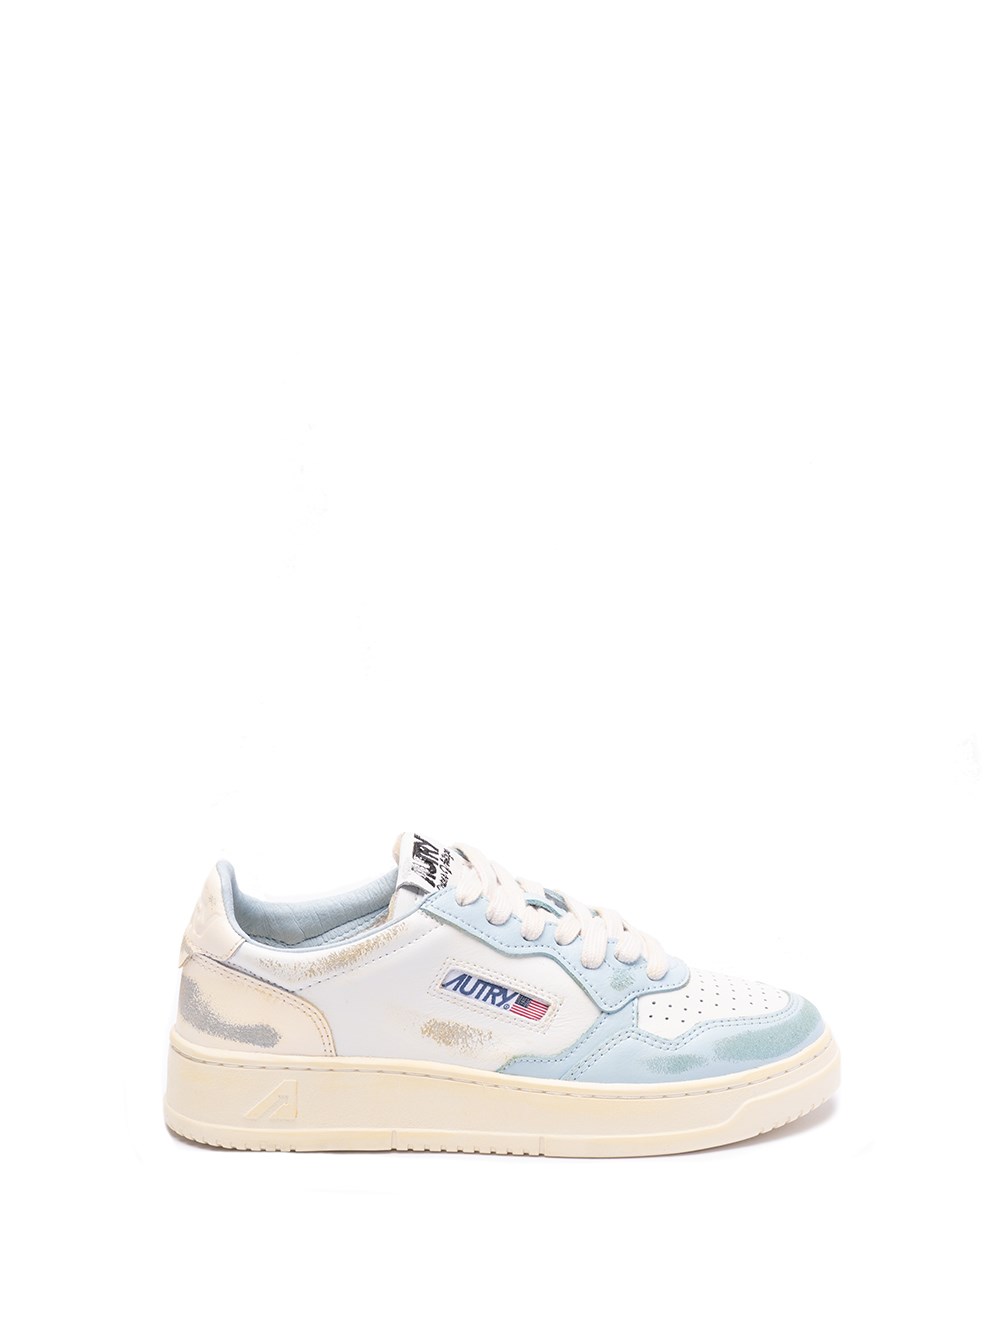 Shop Autry `sup Vint` Low-top Sneakers In White